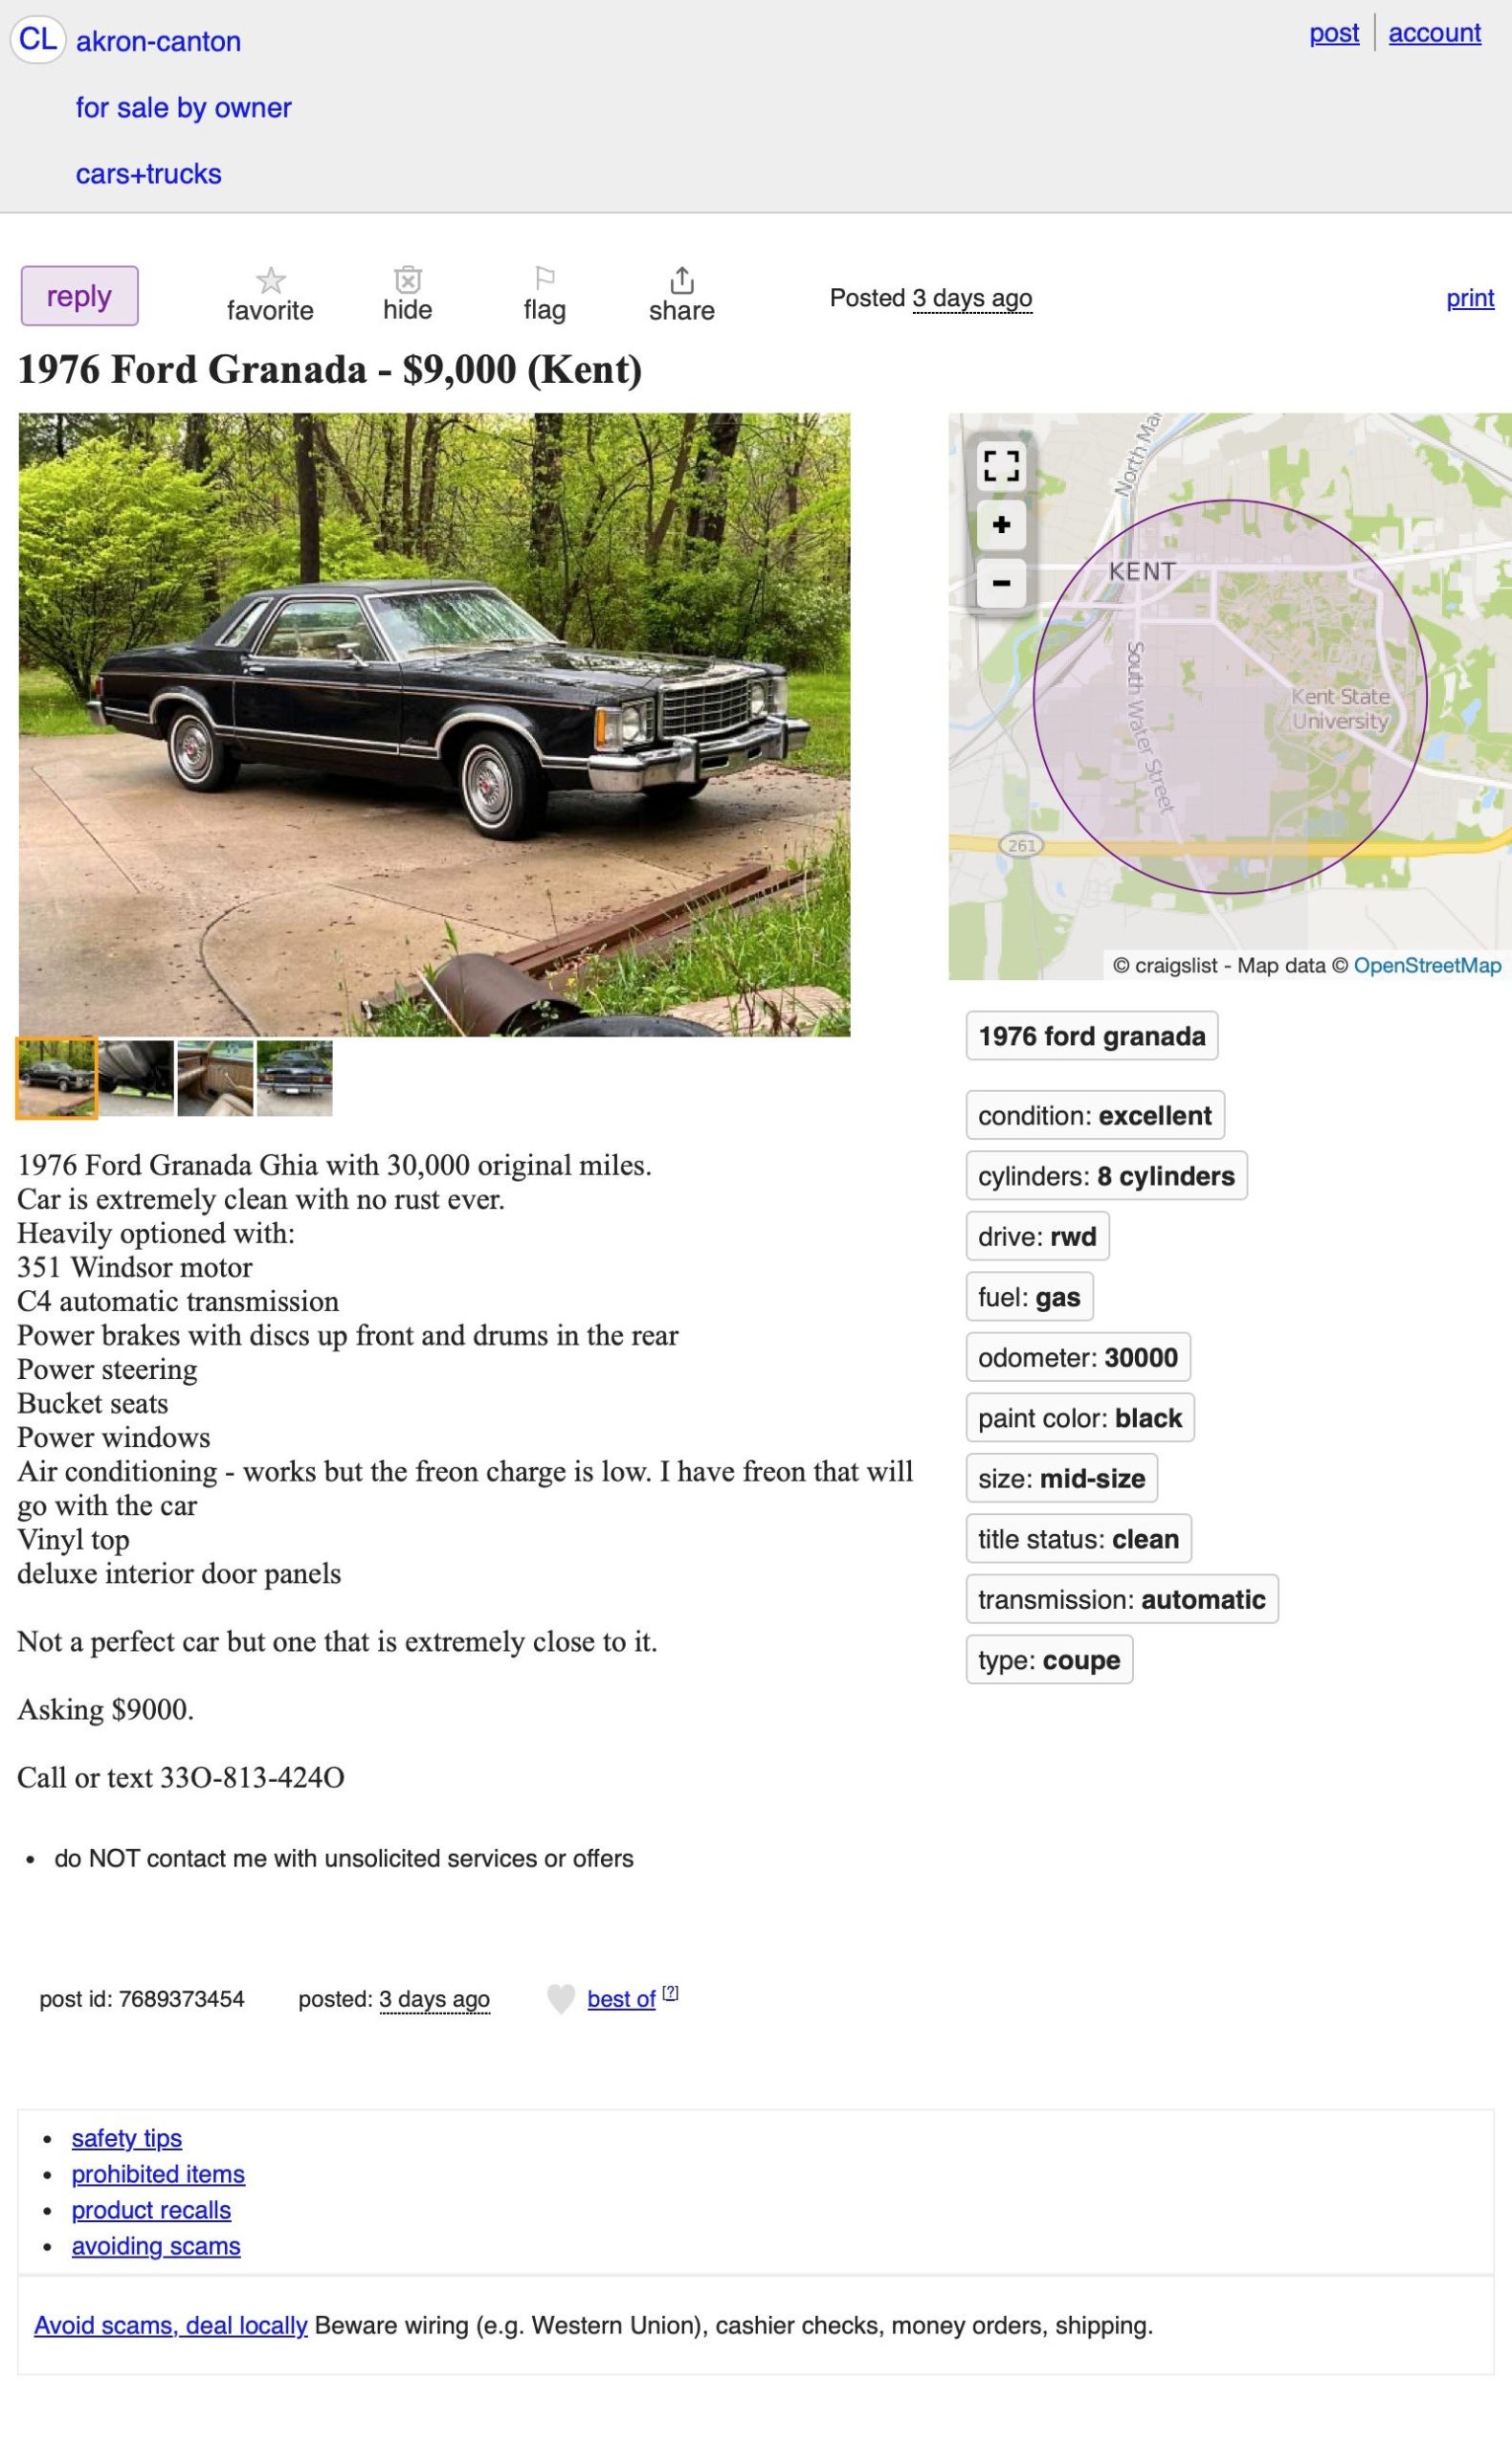 at $9,000, would this 1976 ford granada ghia put you back in black?